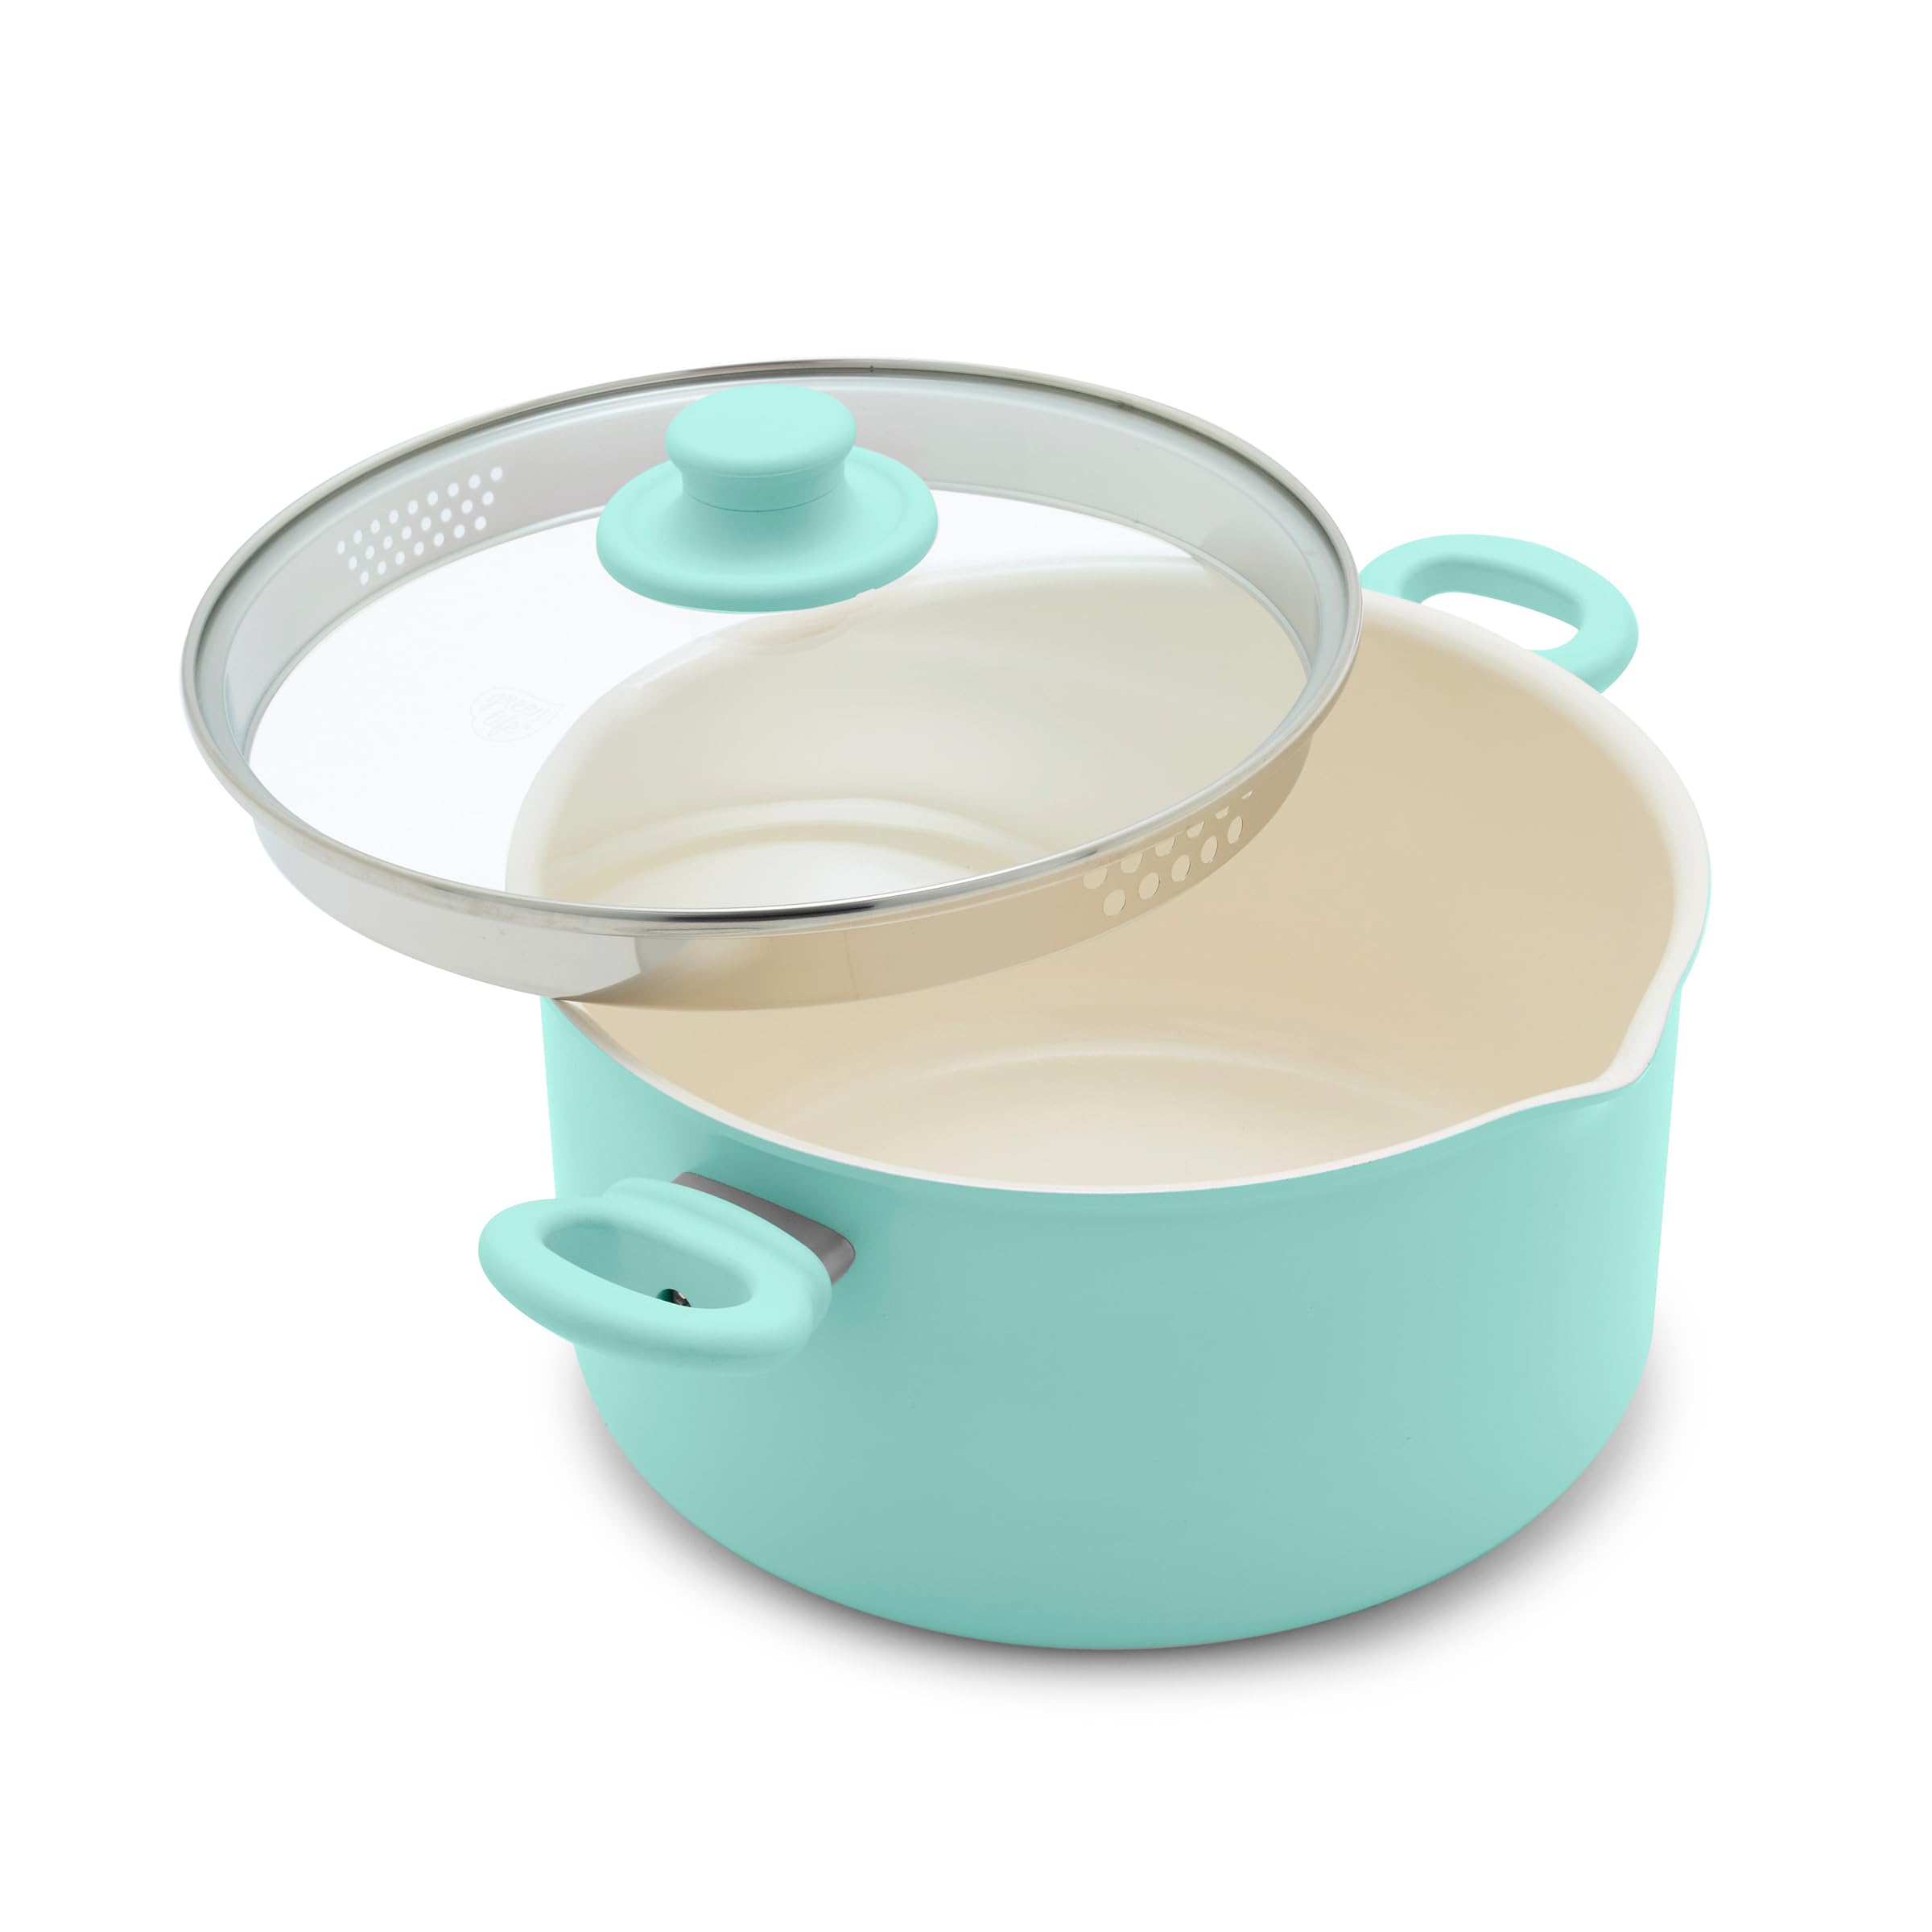 GreenLife SoftGrip Healthy Ceramic Nonstick, 6QT Stockpot with Lid and Straining Lid, PFAS-Free, Dishwasher Safe, Turquoise